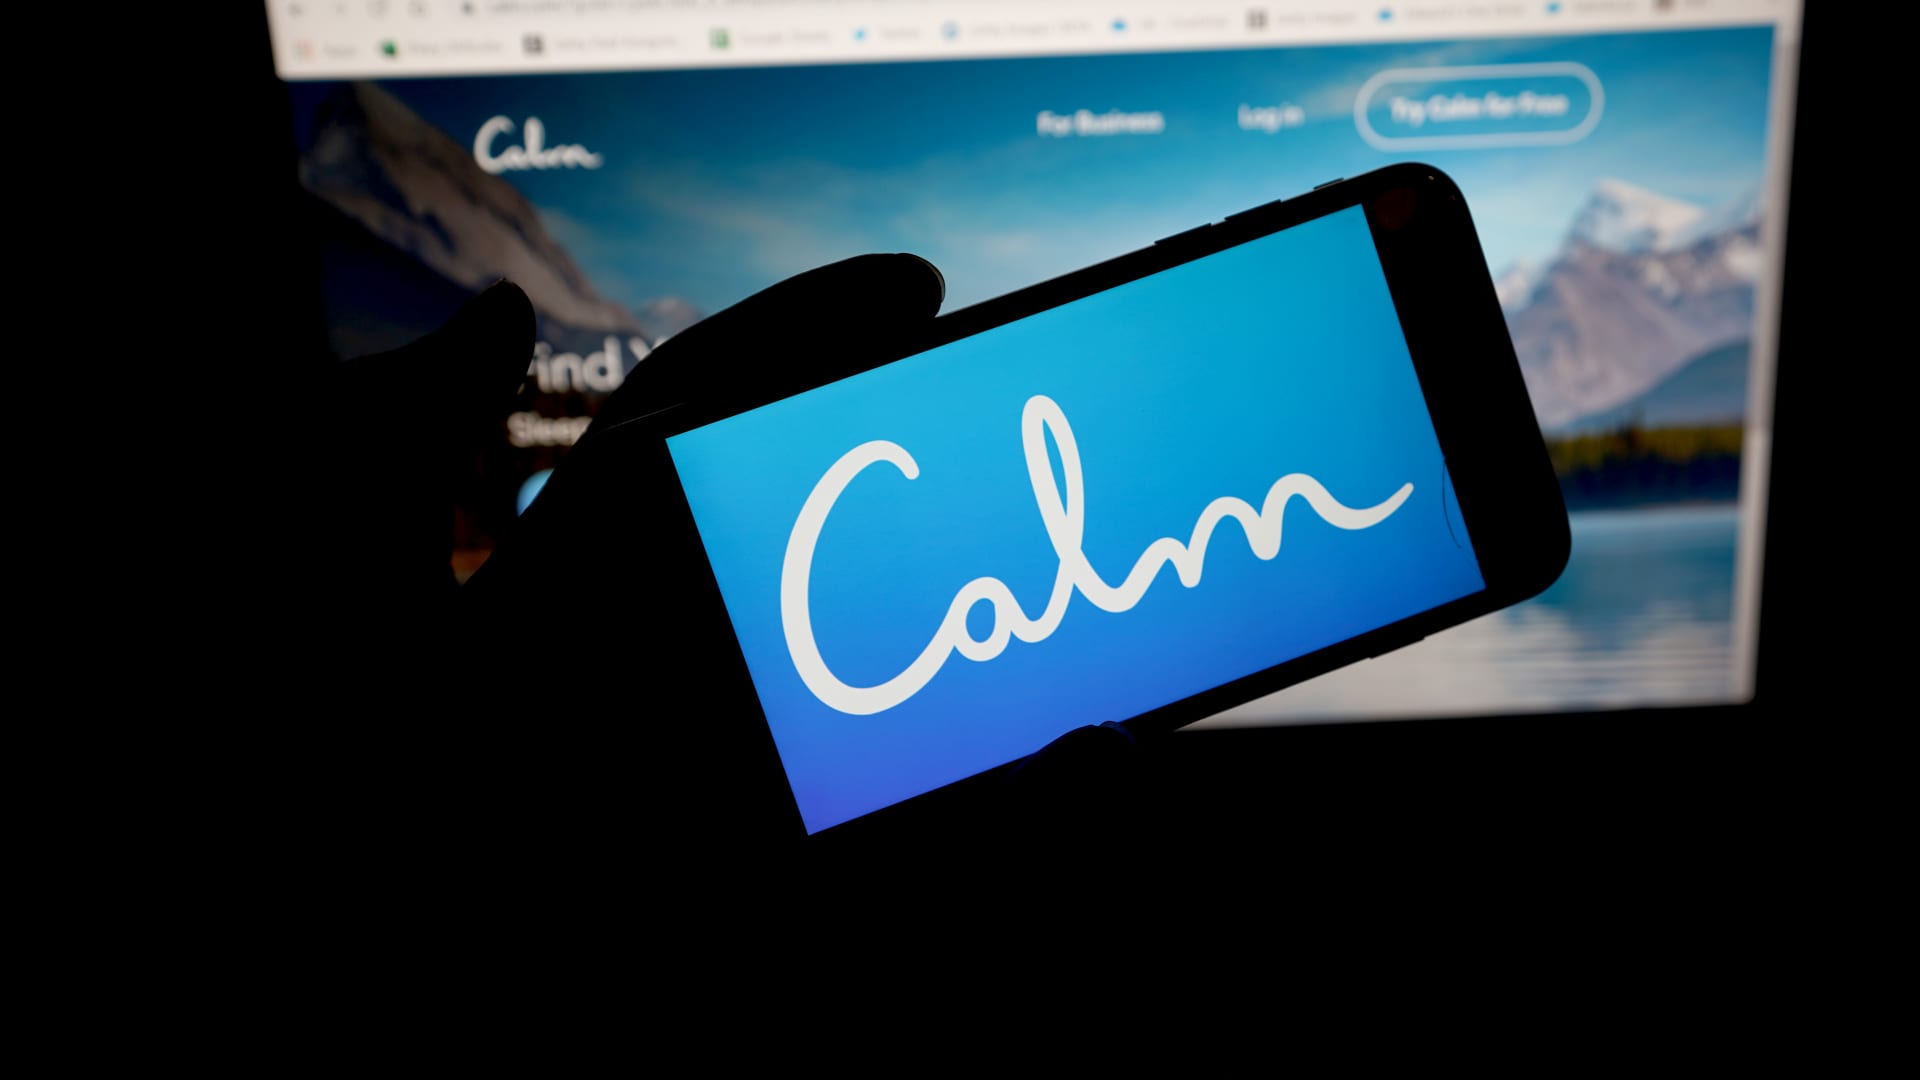 Popular meditation app maker Calm reportedly lays off 20% of employees